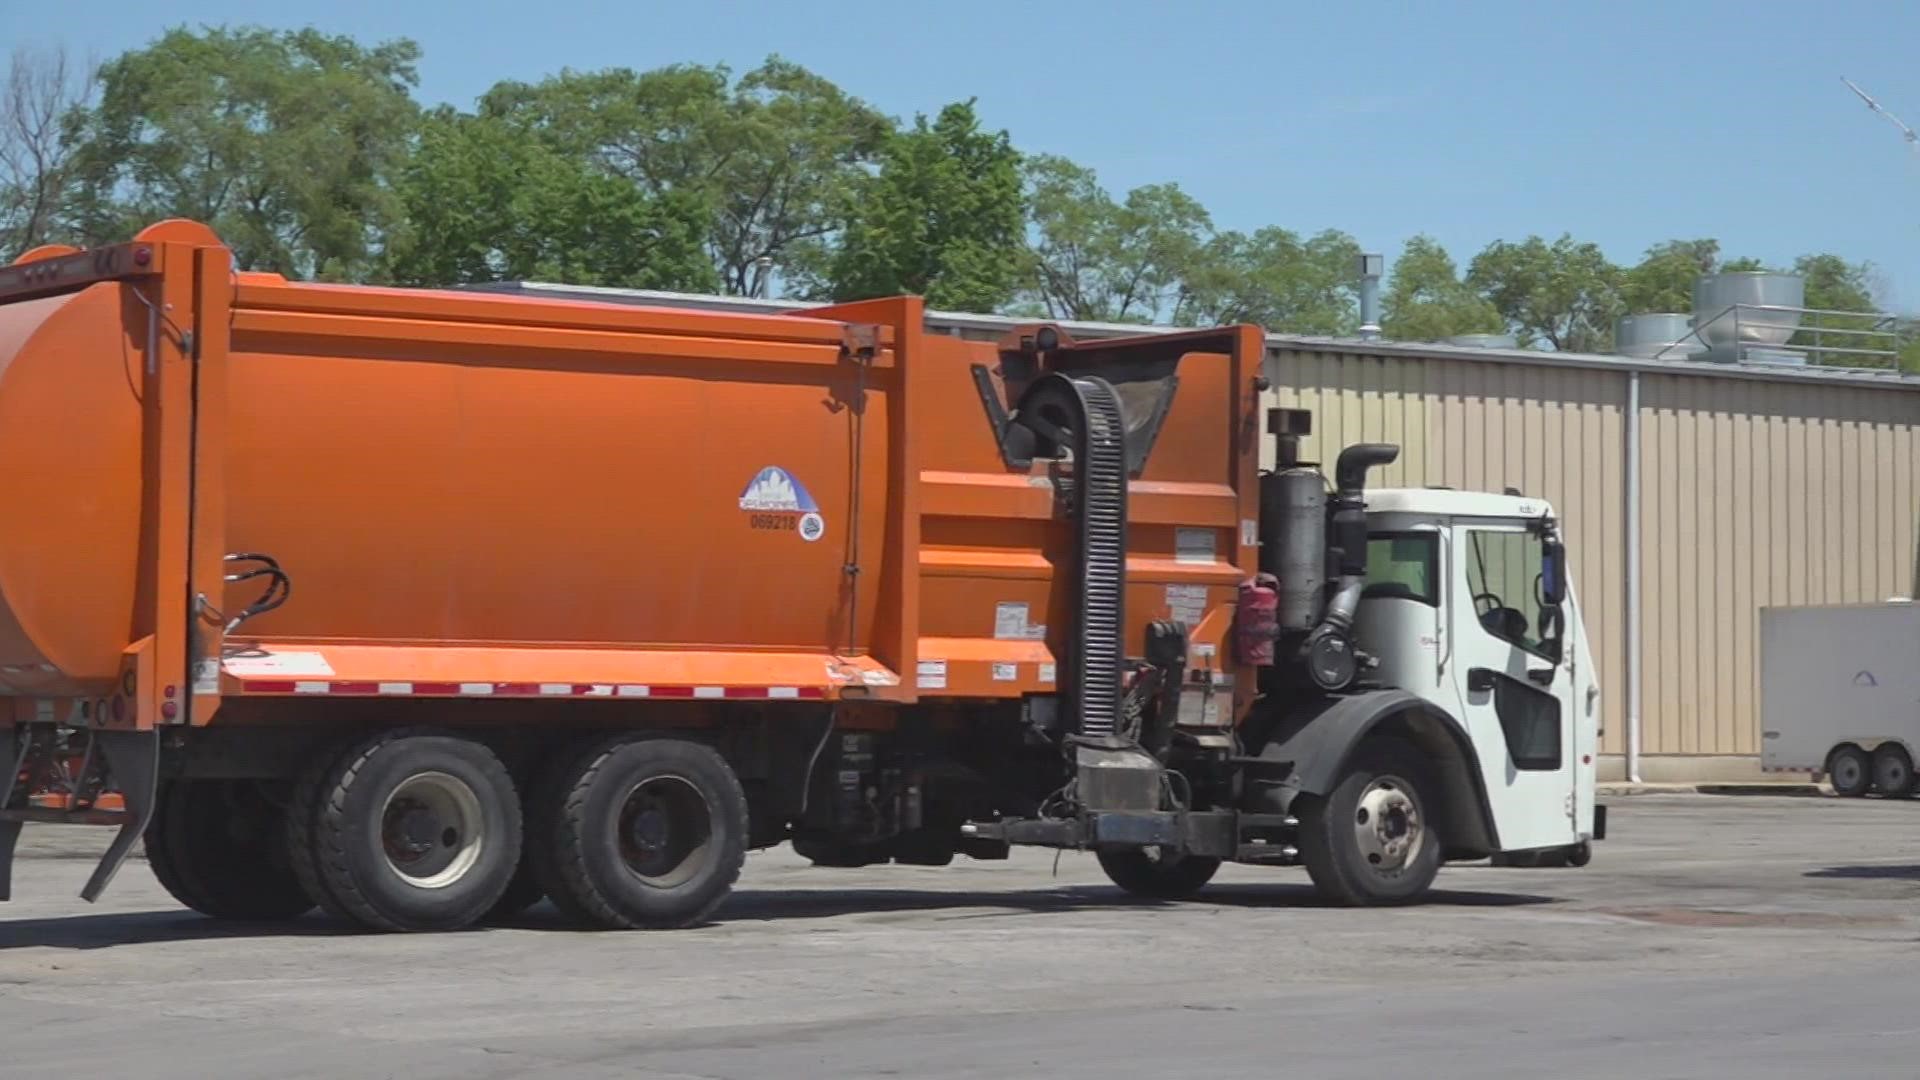 While garbage trucks only make up 4% of the city's fleet, they use 50% of the city's diesel fuel.